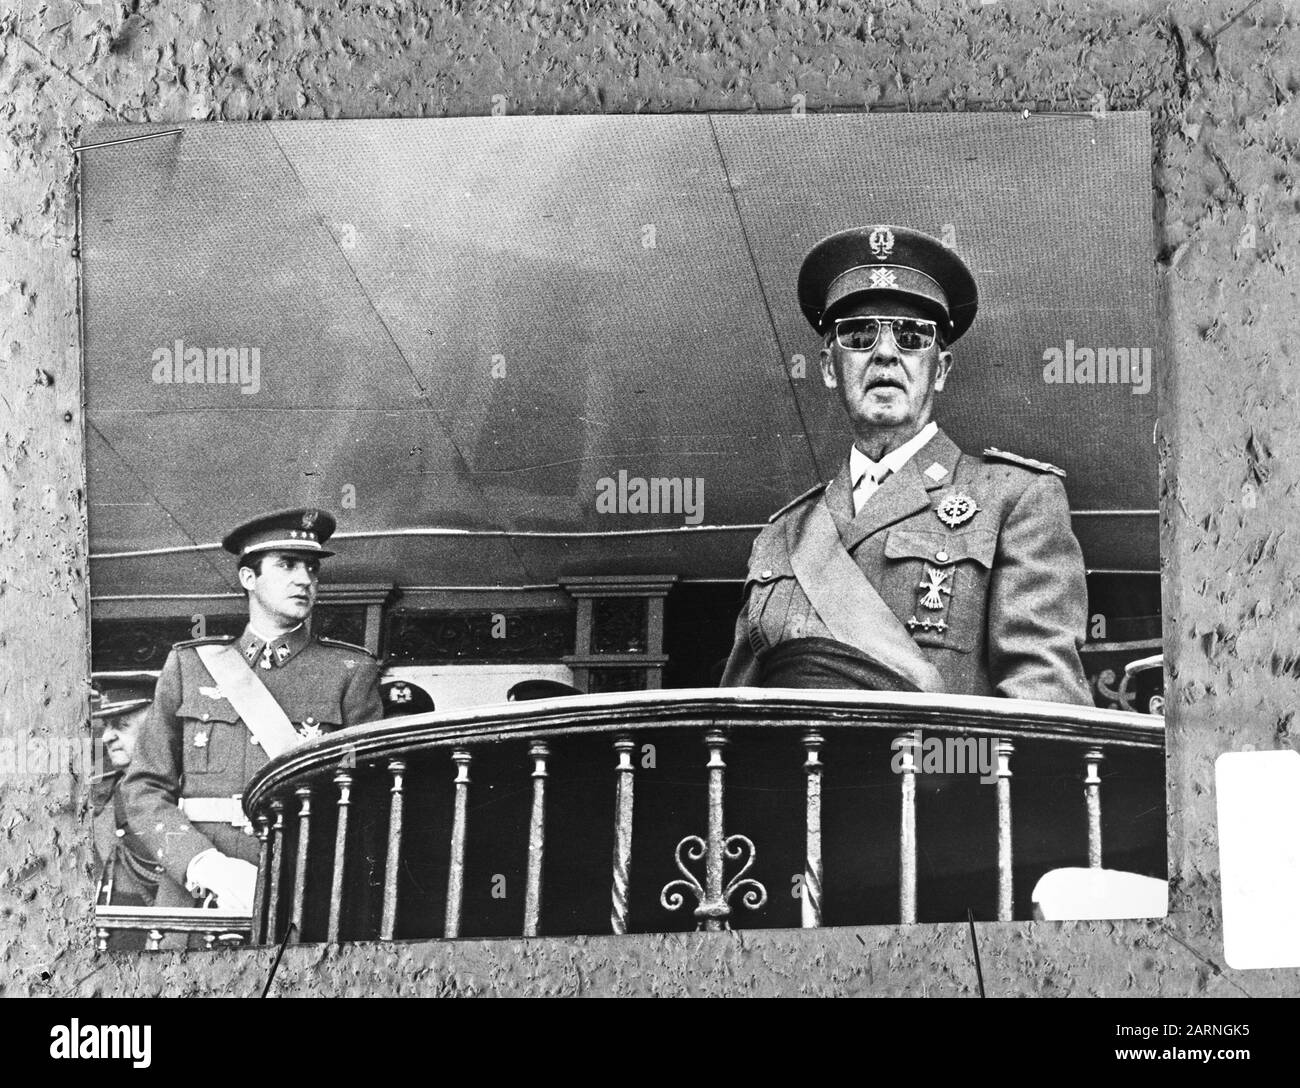 In Madrid it was commemorated that Franco won the civil war 30 years ago (1936 1939) during the Parade left Prince Juan Carlos de Bourbon, right General Franco Date: 5 June 1969 Location: Madrid Keywords: civil wars, commemorations, parades Personal name: Franco, Prince Juan Carlos de Bourbon Stock Photo